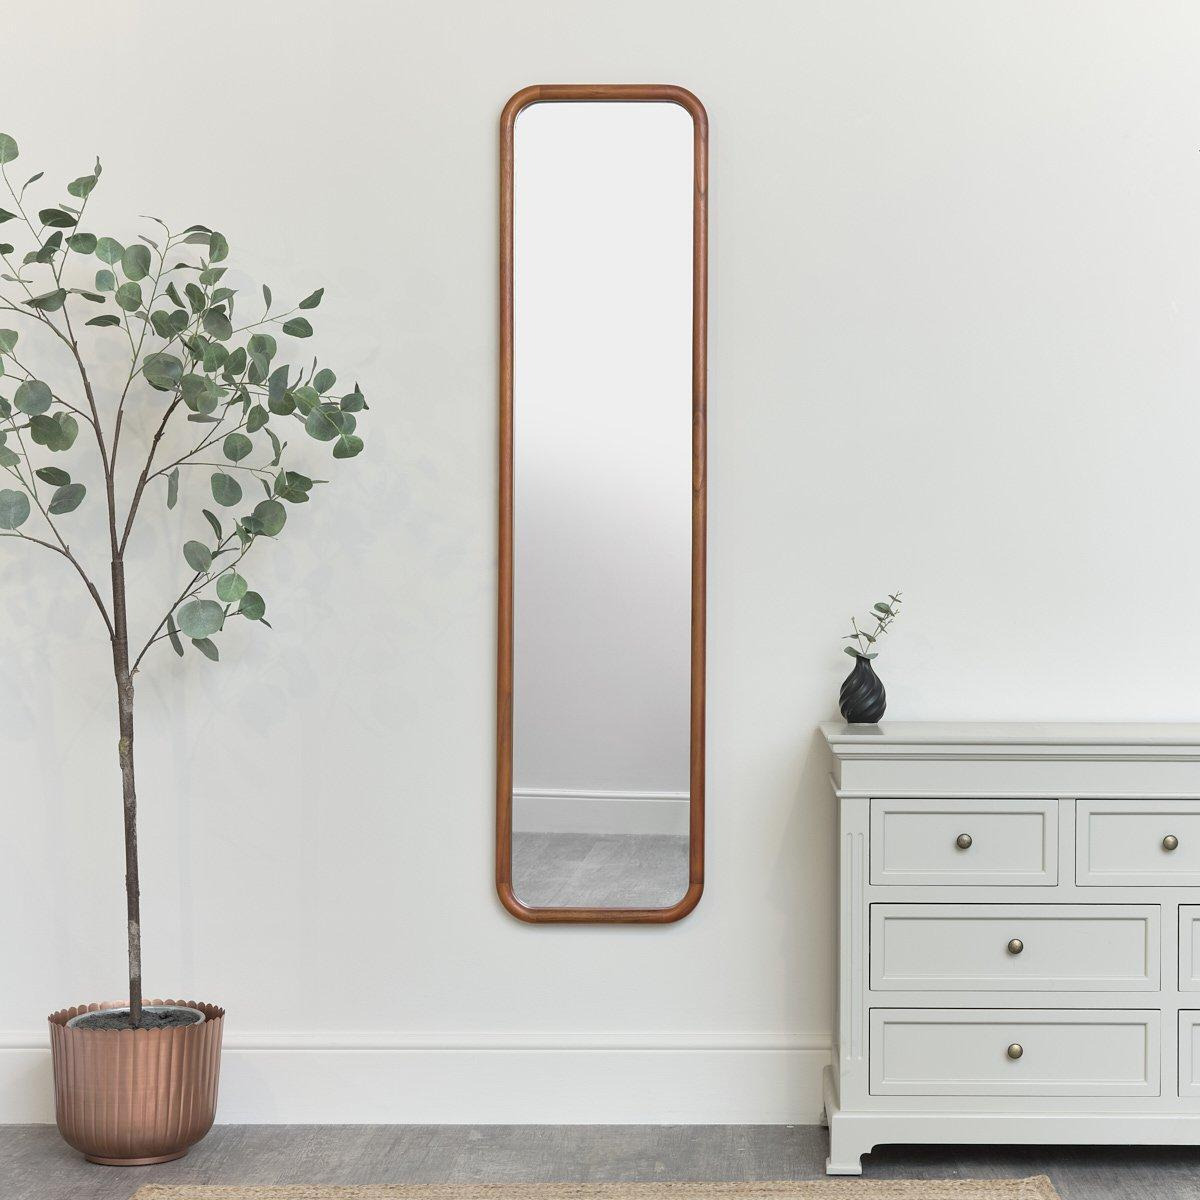 Tall Wooden Curved Framed Wall Mirror - 160cm X 40cm - image 1